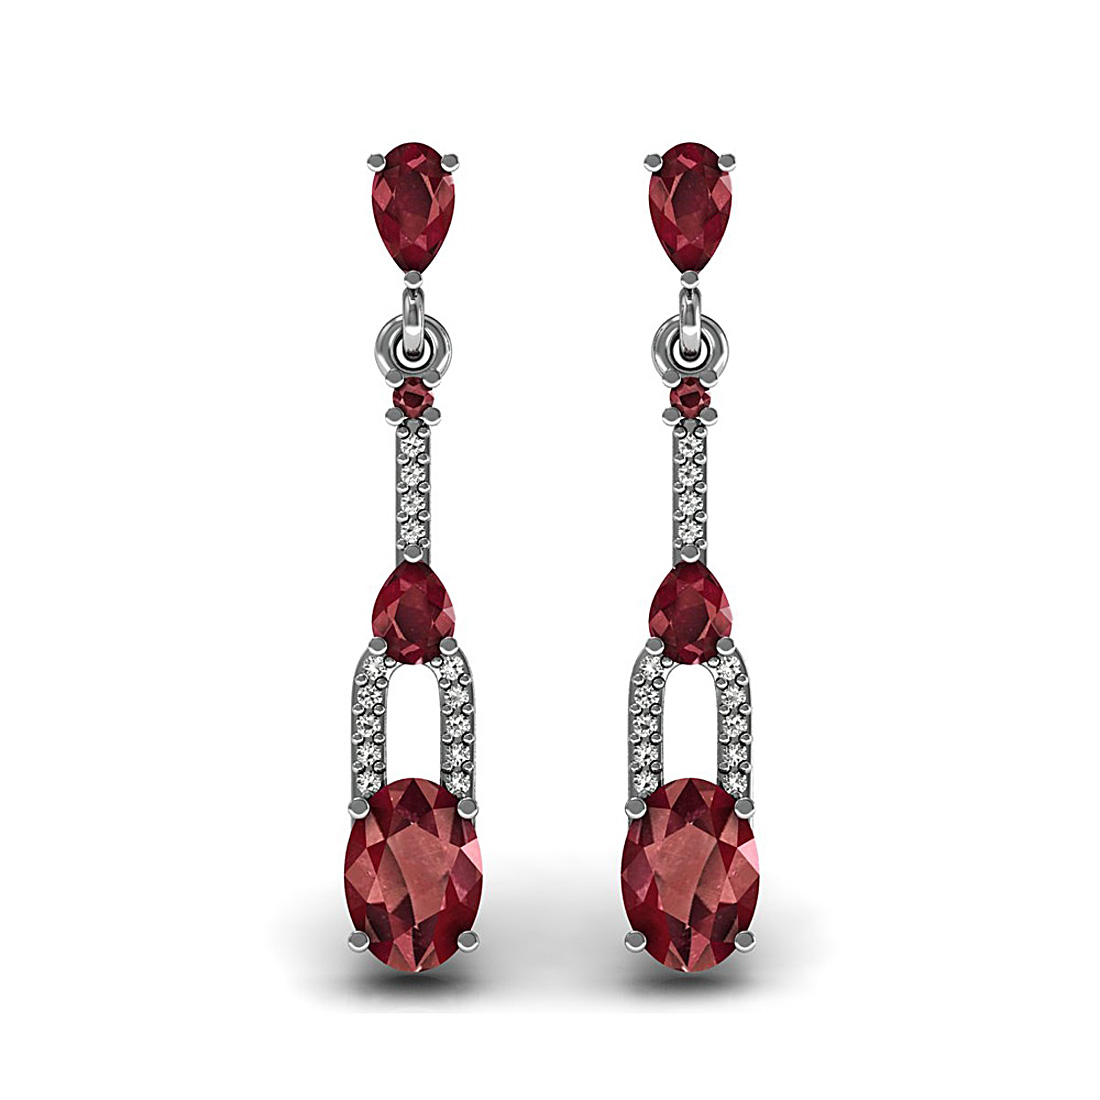 Dangle drop earrings made in 18k solid white gold studded with real diamond and natural ruby gemstone.